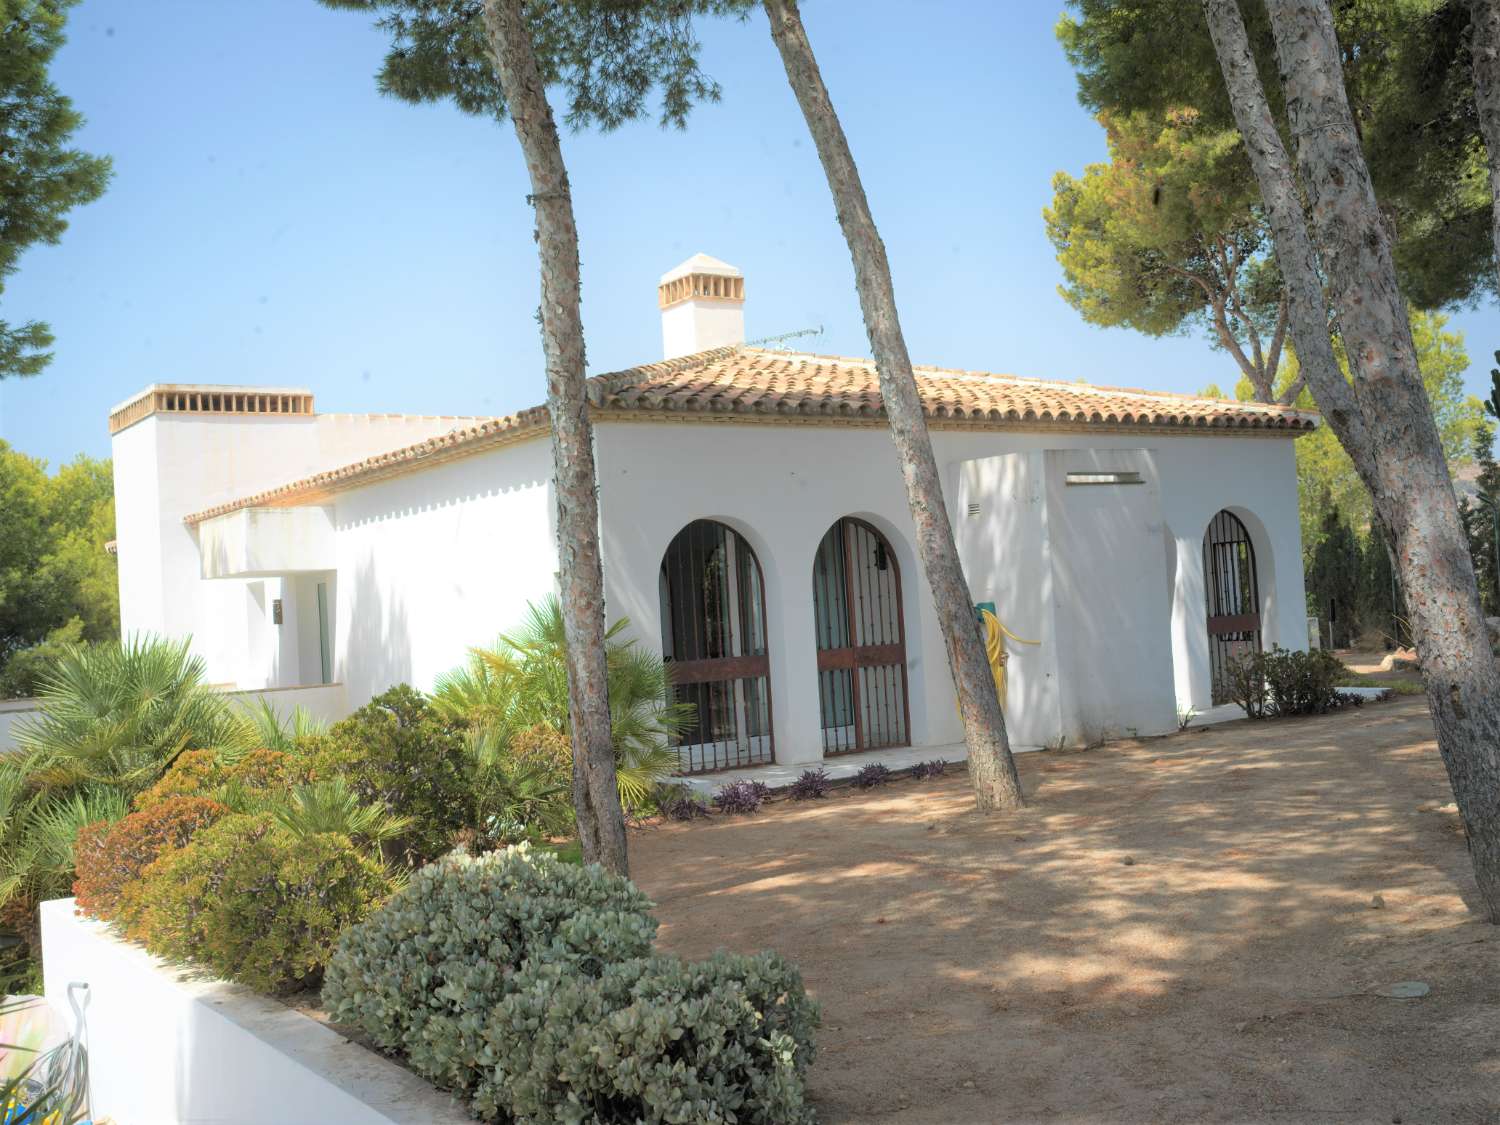 SOLD! SPECTACULAR INDEPENDENT VILLA SITUATED IN THE BEST AREA OF MÁLAGA